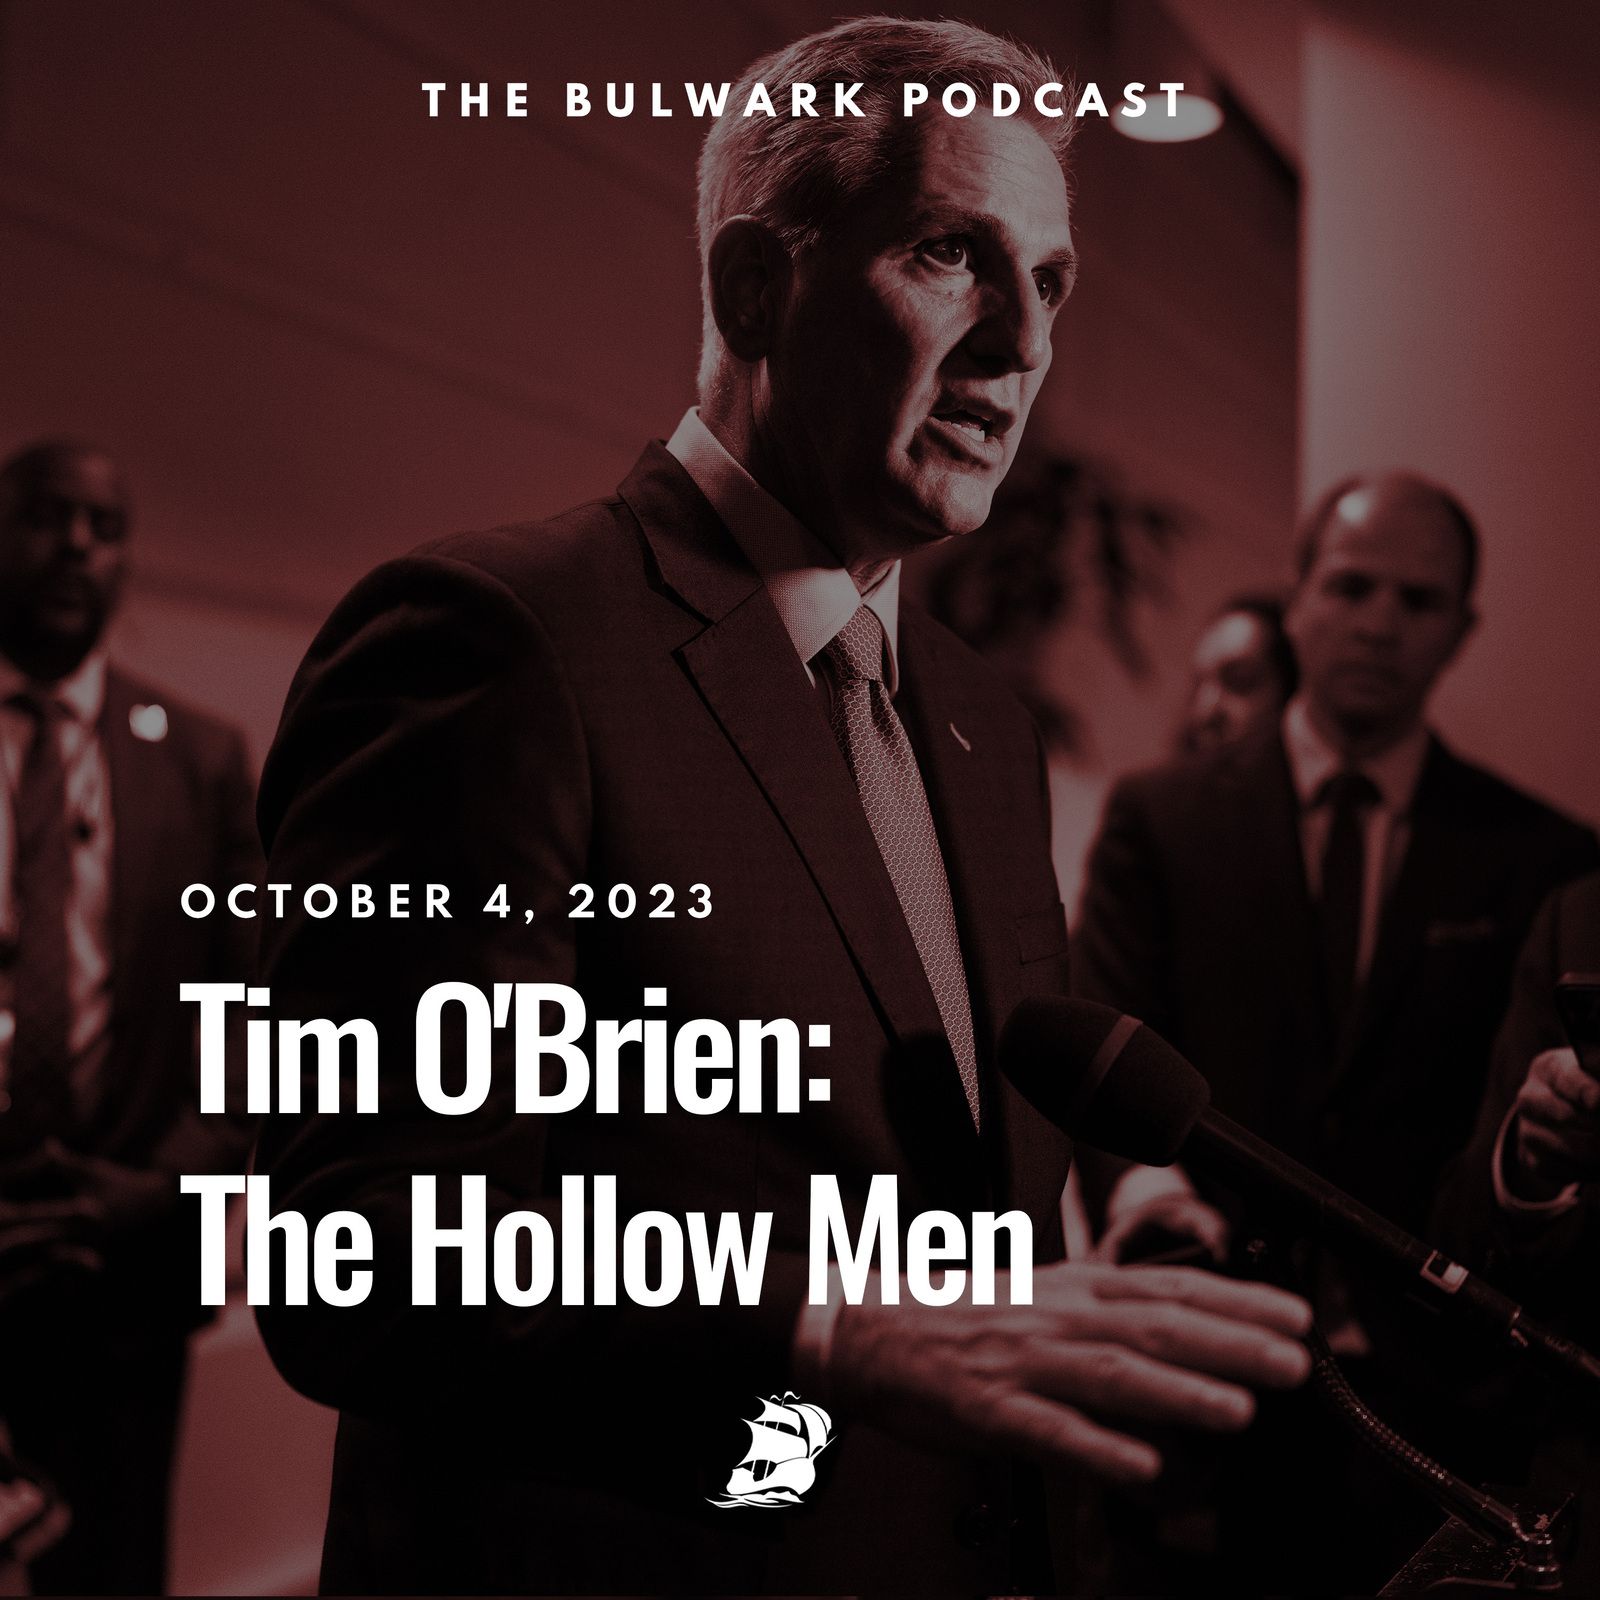 Tim O'Brien: The Hollow Men by The Bulwark Podcast